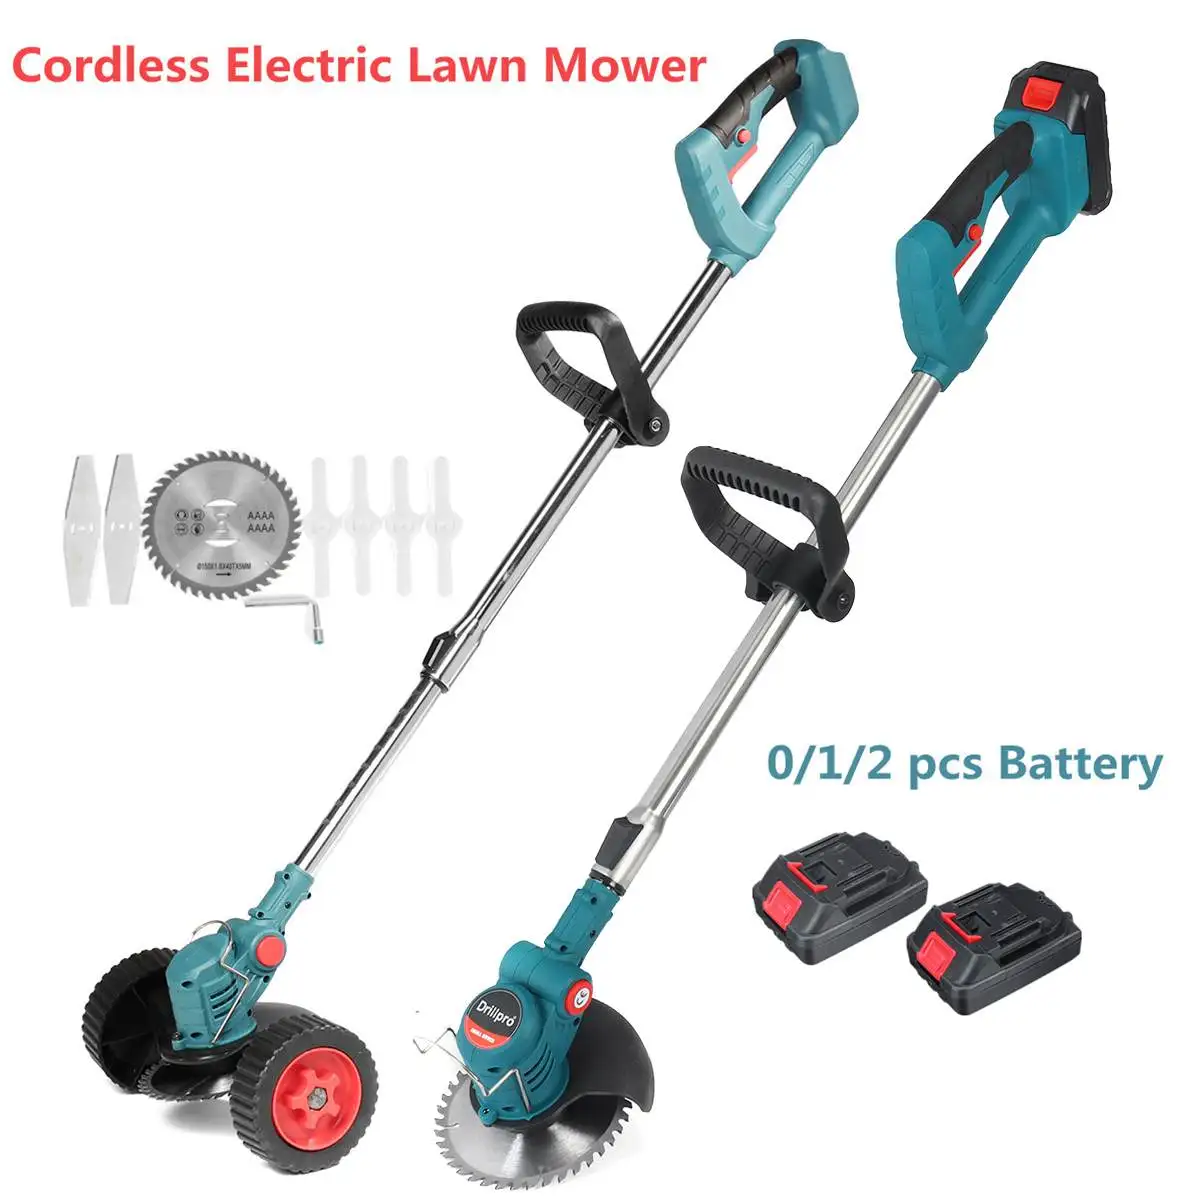 [Drillpro] Electric Lawn Mower 21V Cordless Grass Trimmer Adjustable Cutter Household Garden Tools Compatible Makita 18V Battery